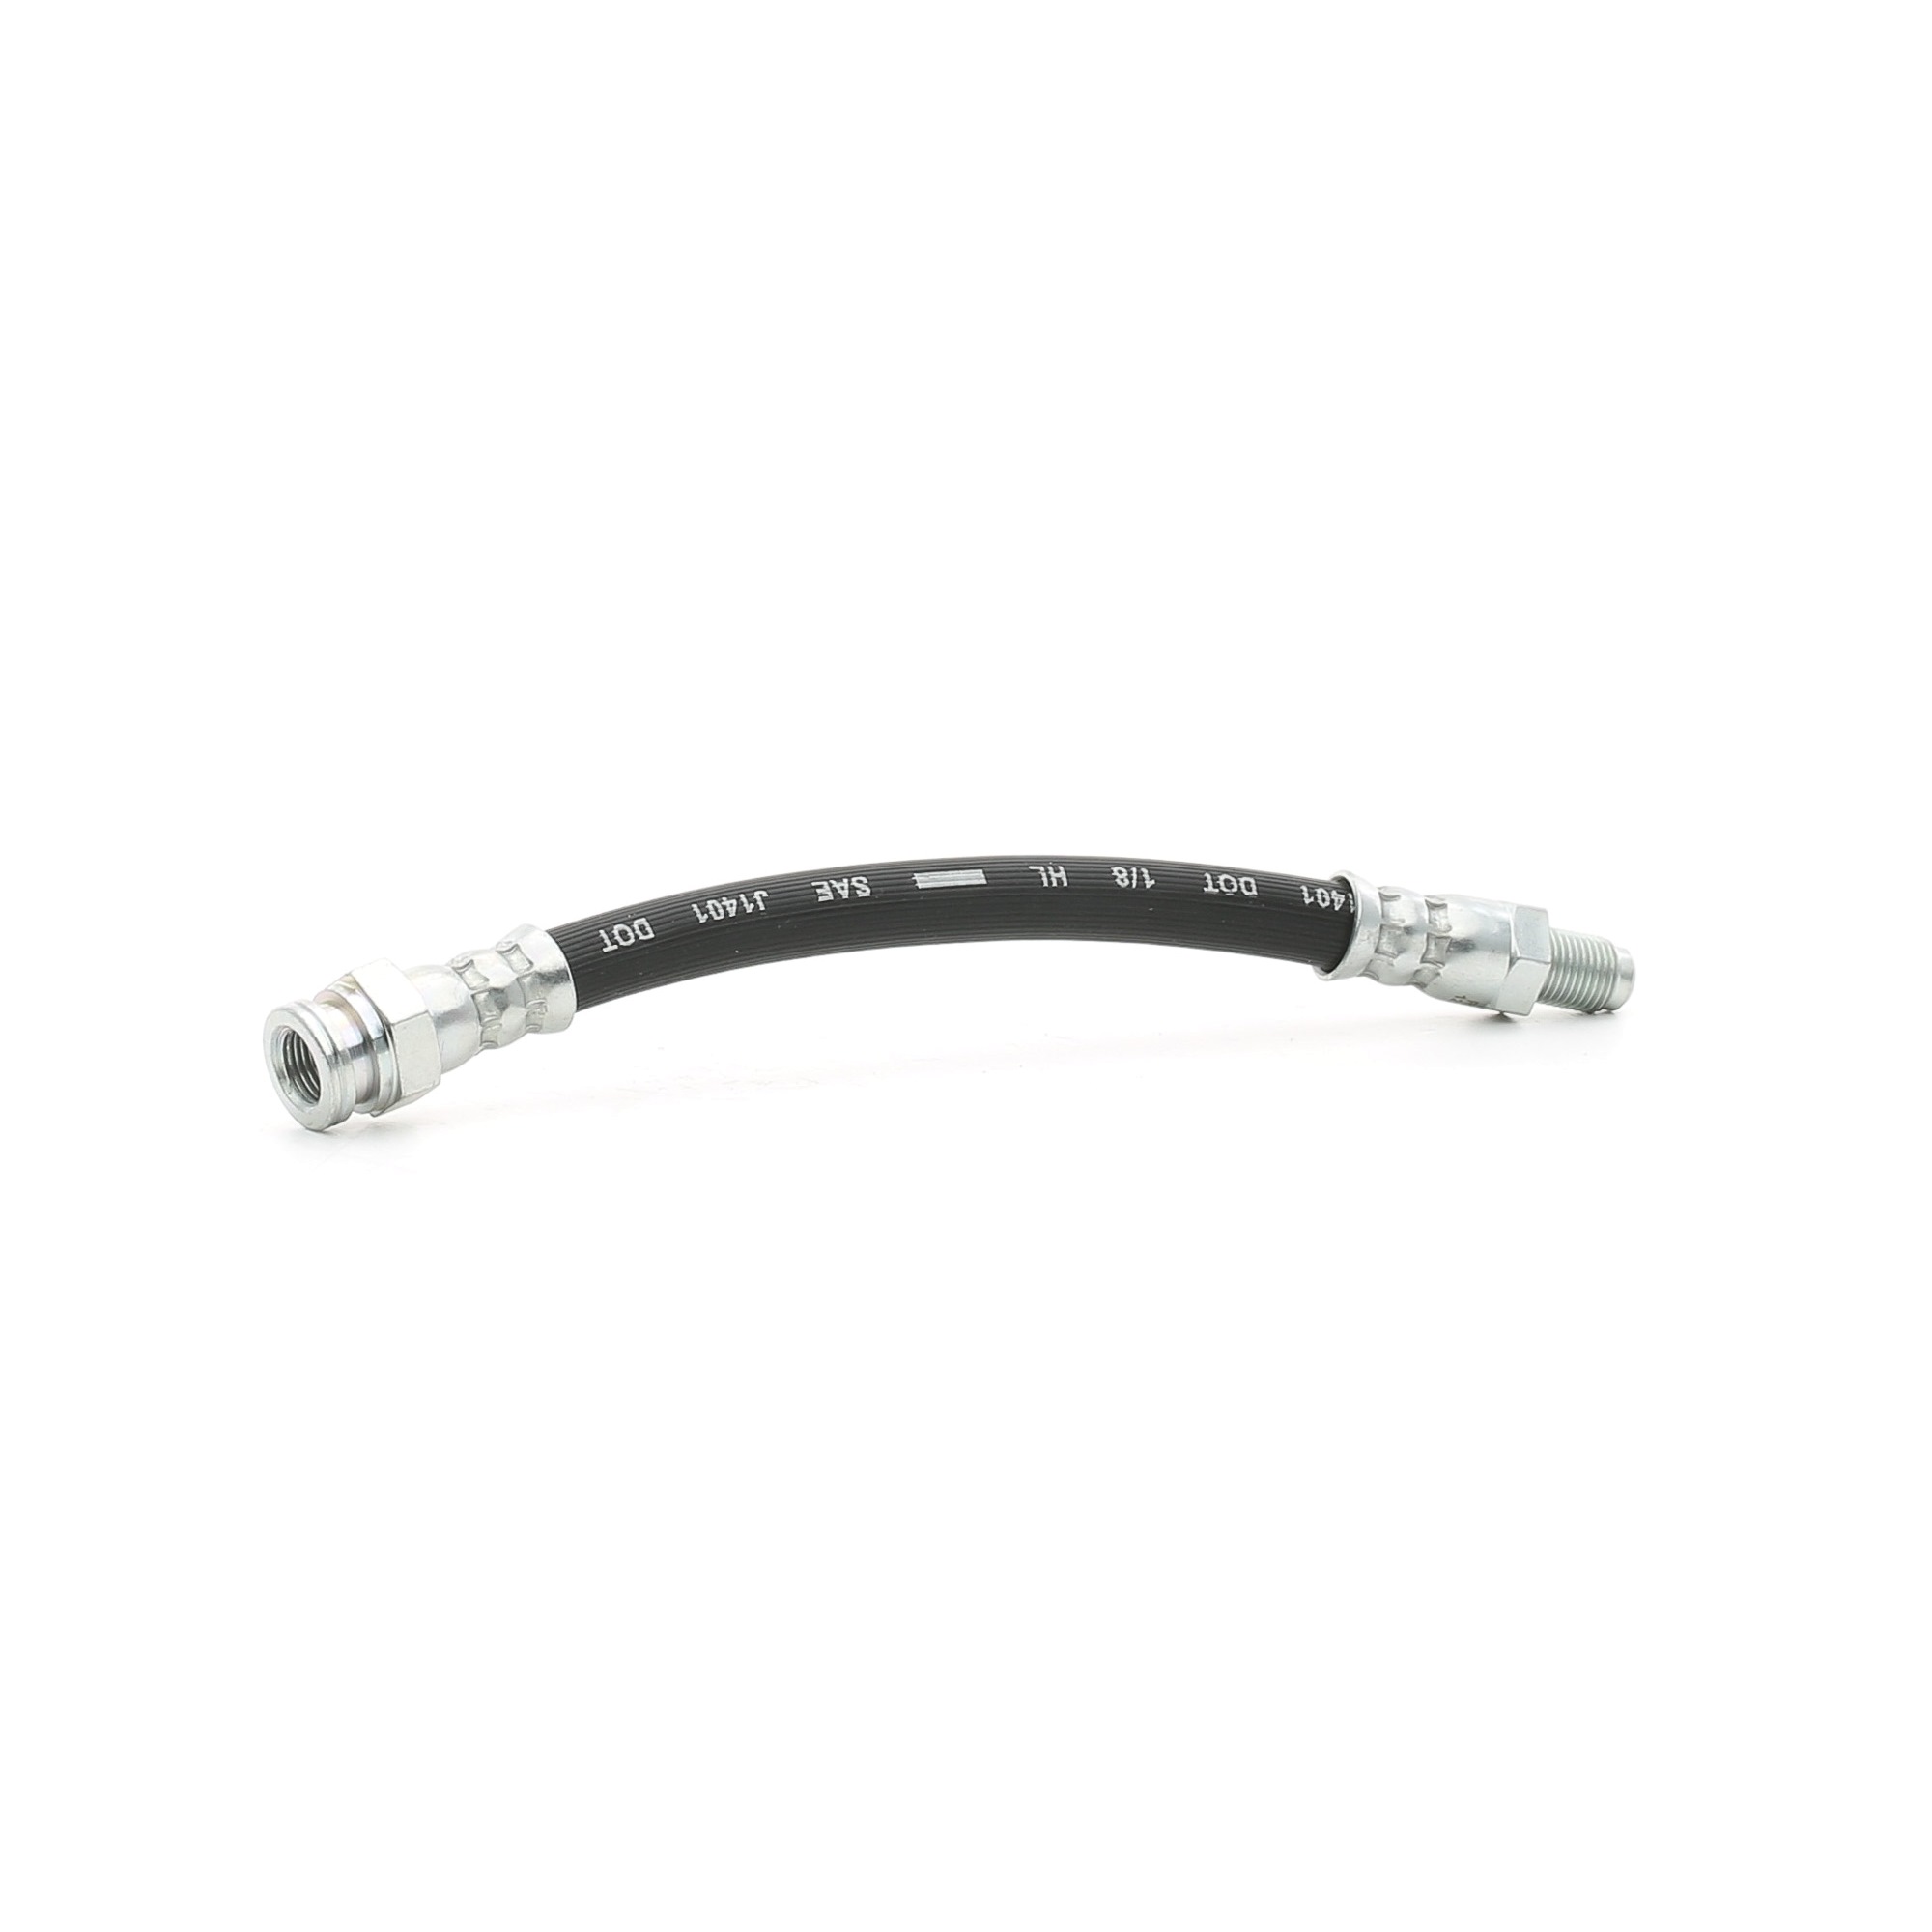 Fiat MULTIPLA Pipes and hoses parts - Brake hose A.B.S. SL 3911